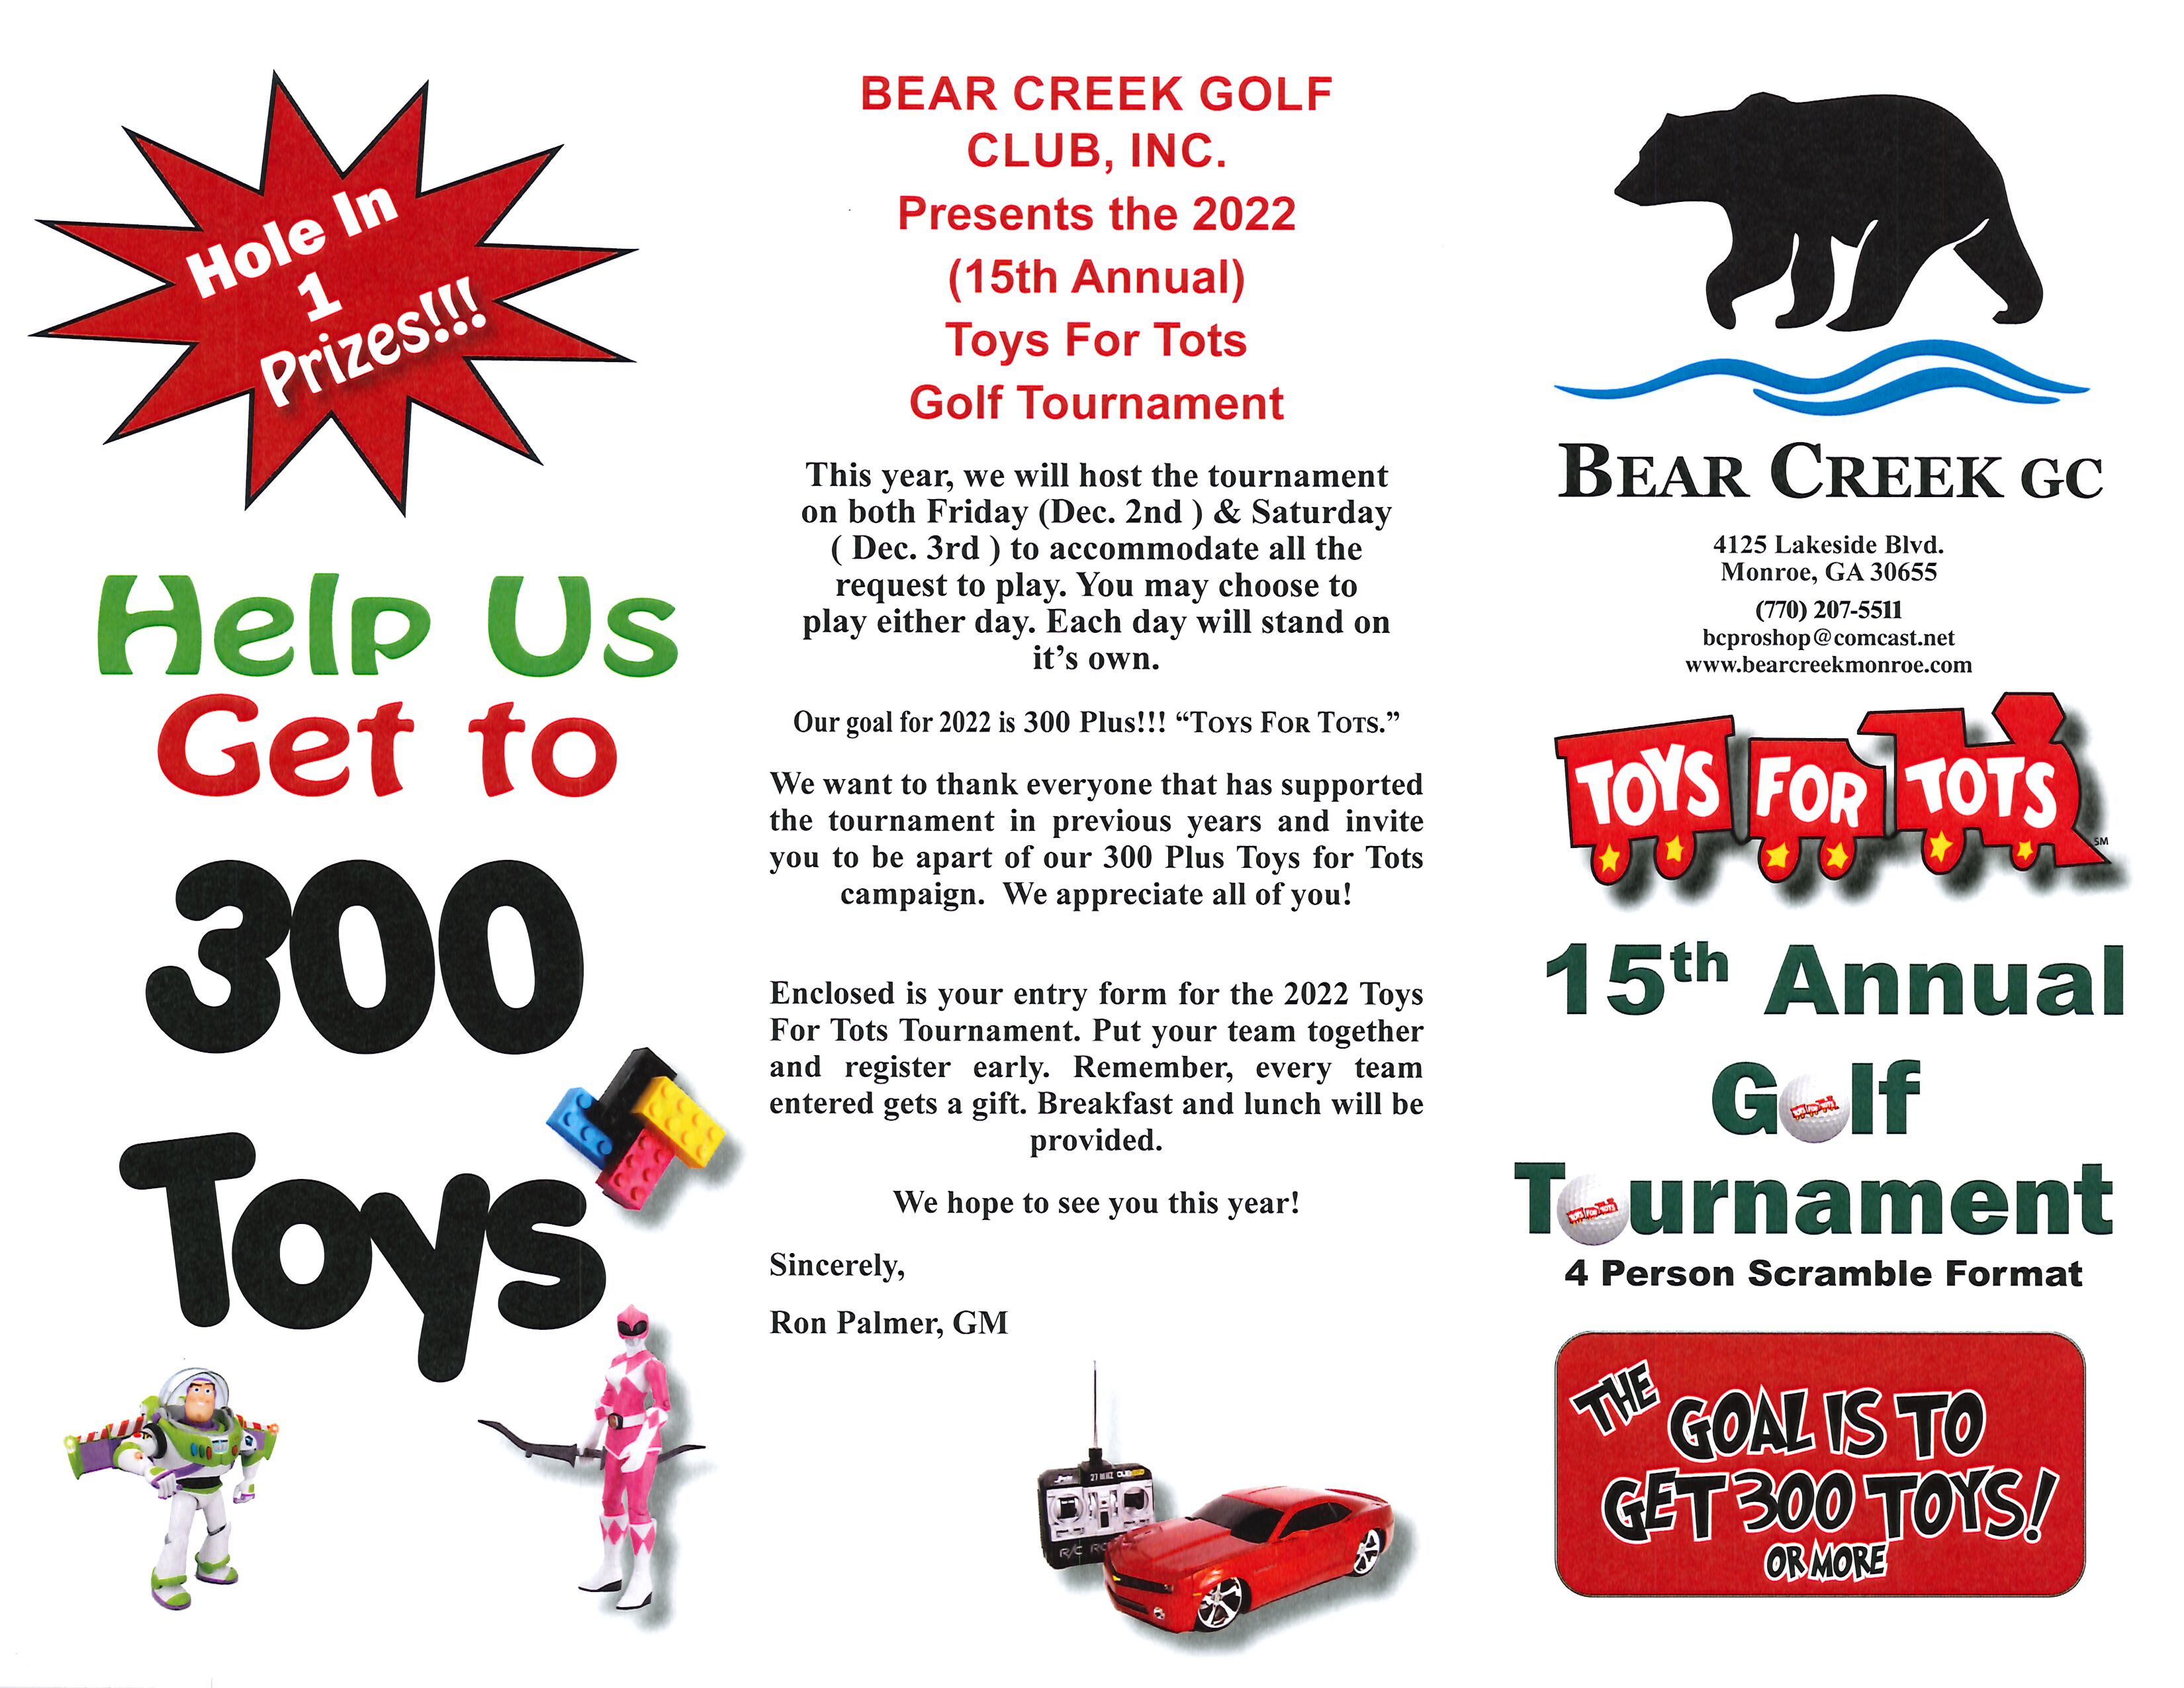 Toys for Tots at Bear Creek